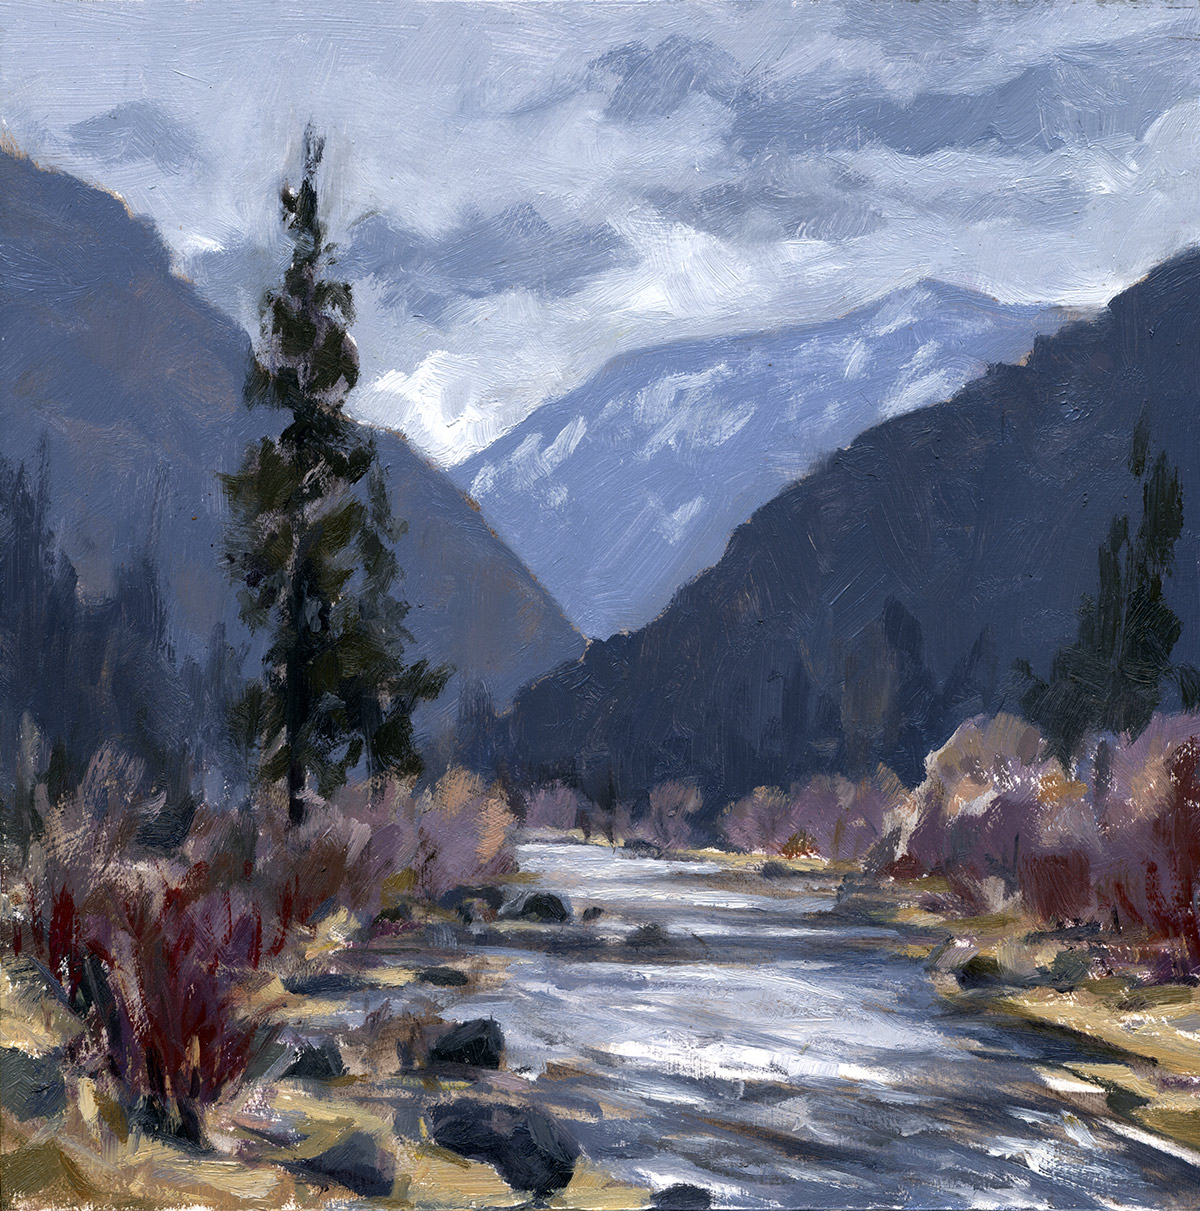 Jared Shear, plein air, Montana, oil painting, landscape, Thompson River, water, river, mountains